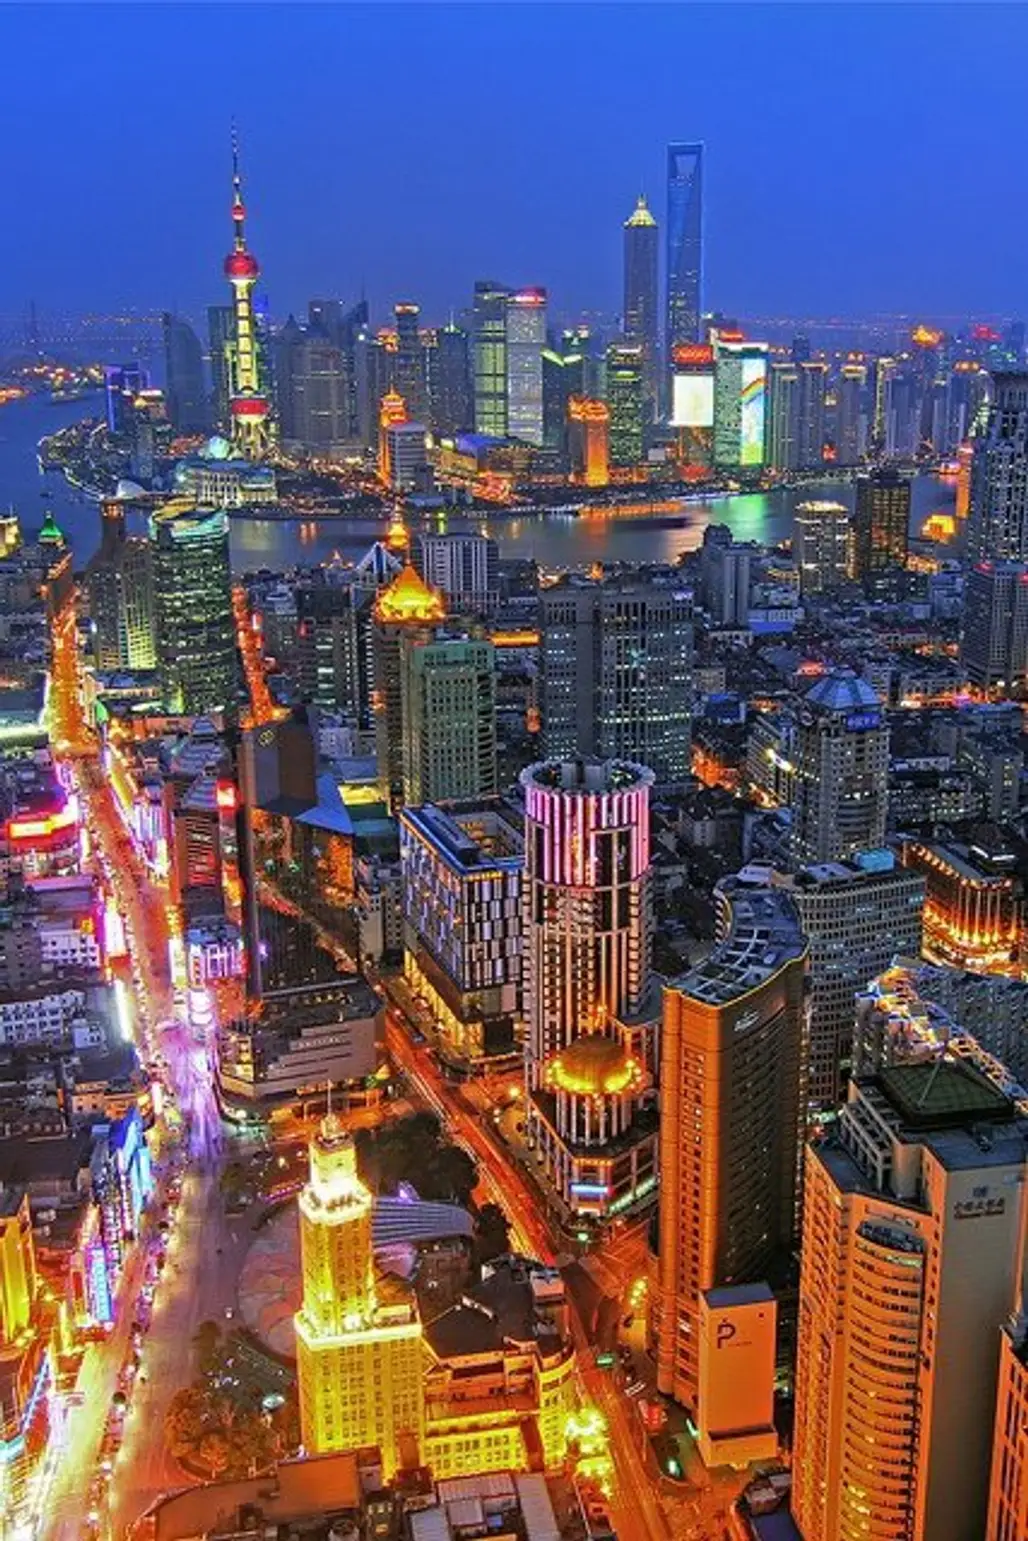 Get Lost in One of the Busiest and Most Prosperous Cities in the World in Shanghai, China